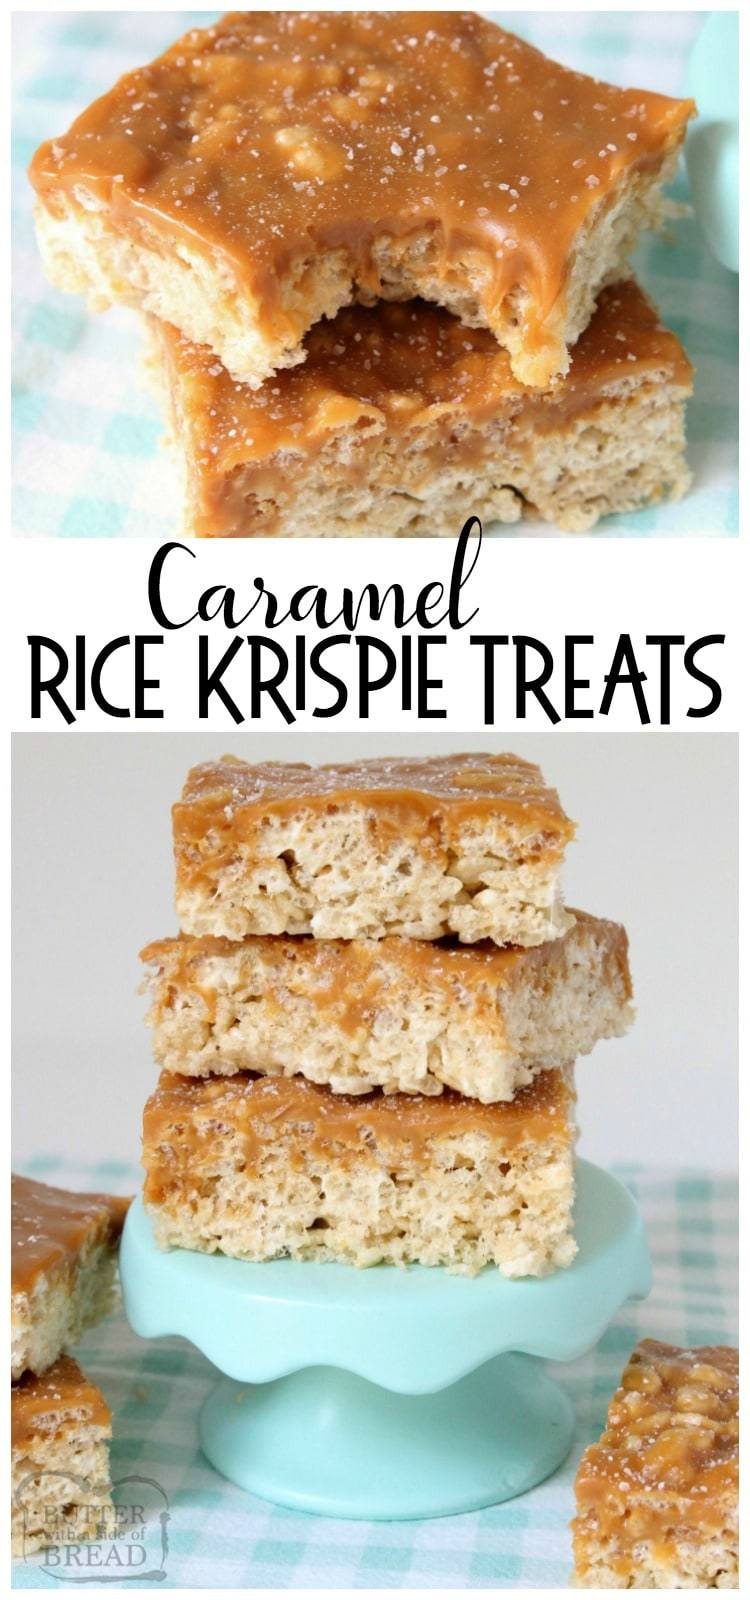 Caramel Rice Krispie Treats are soft, chewy marshmallow squares topped with smooth, rich caramel for an incredible take on traditional rice krispie treats. Easy rice krispie treat recipe from Butter With A Side of Bread